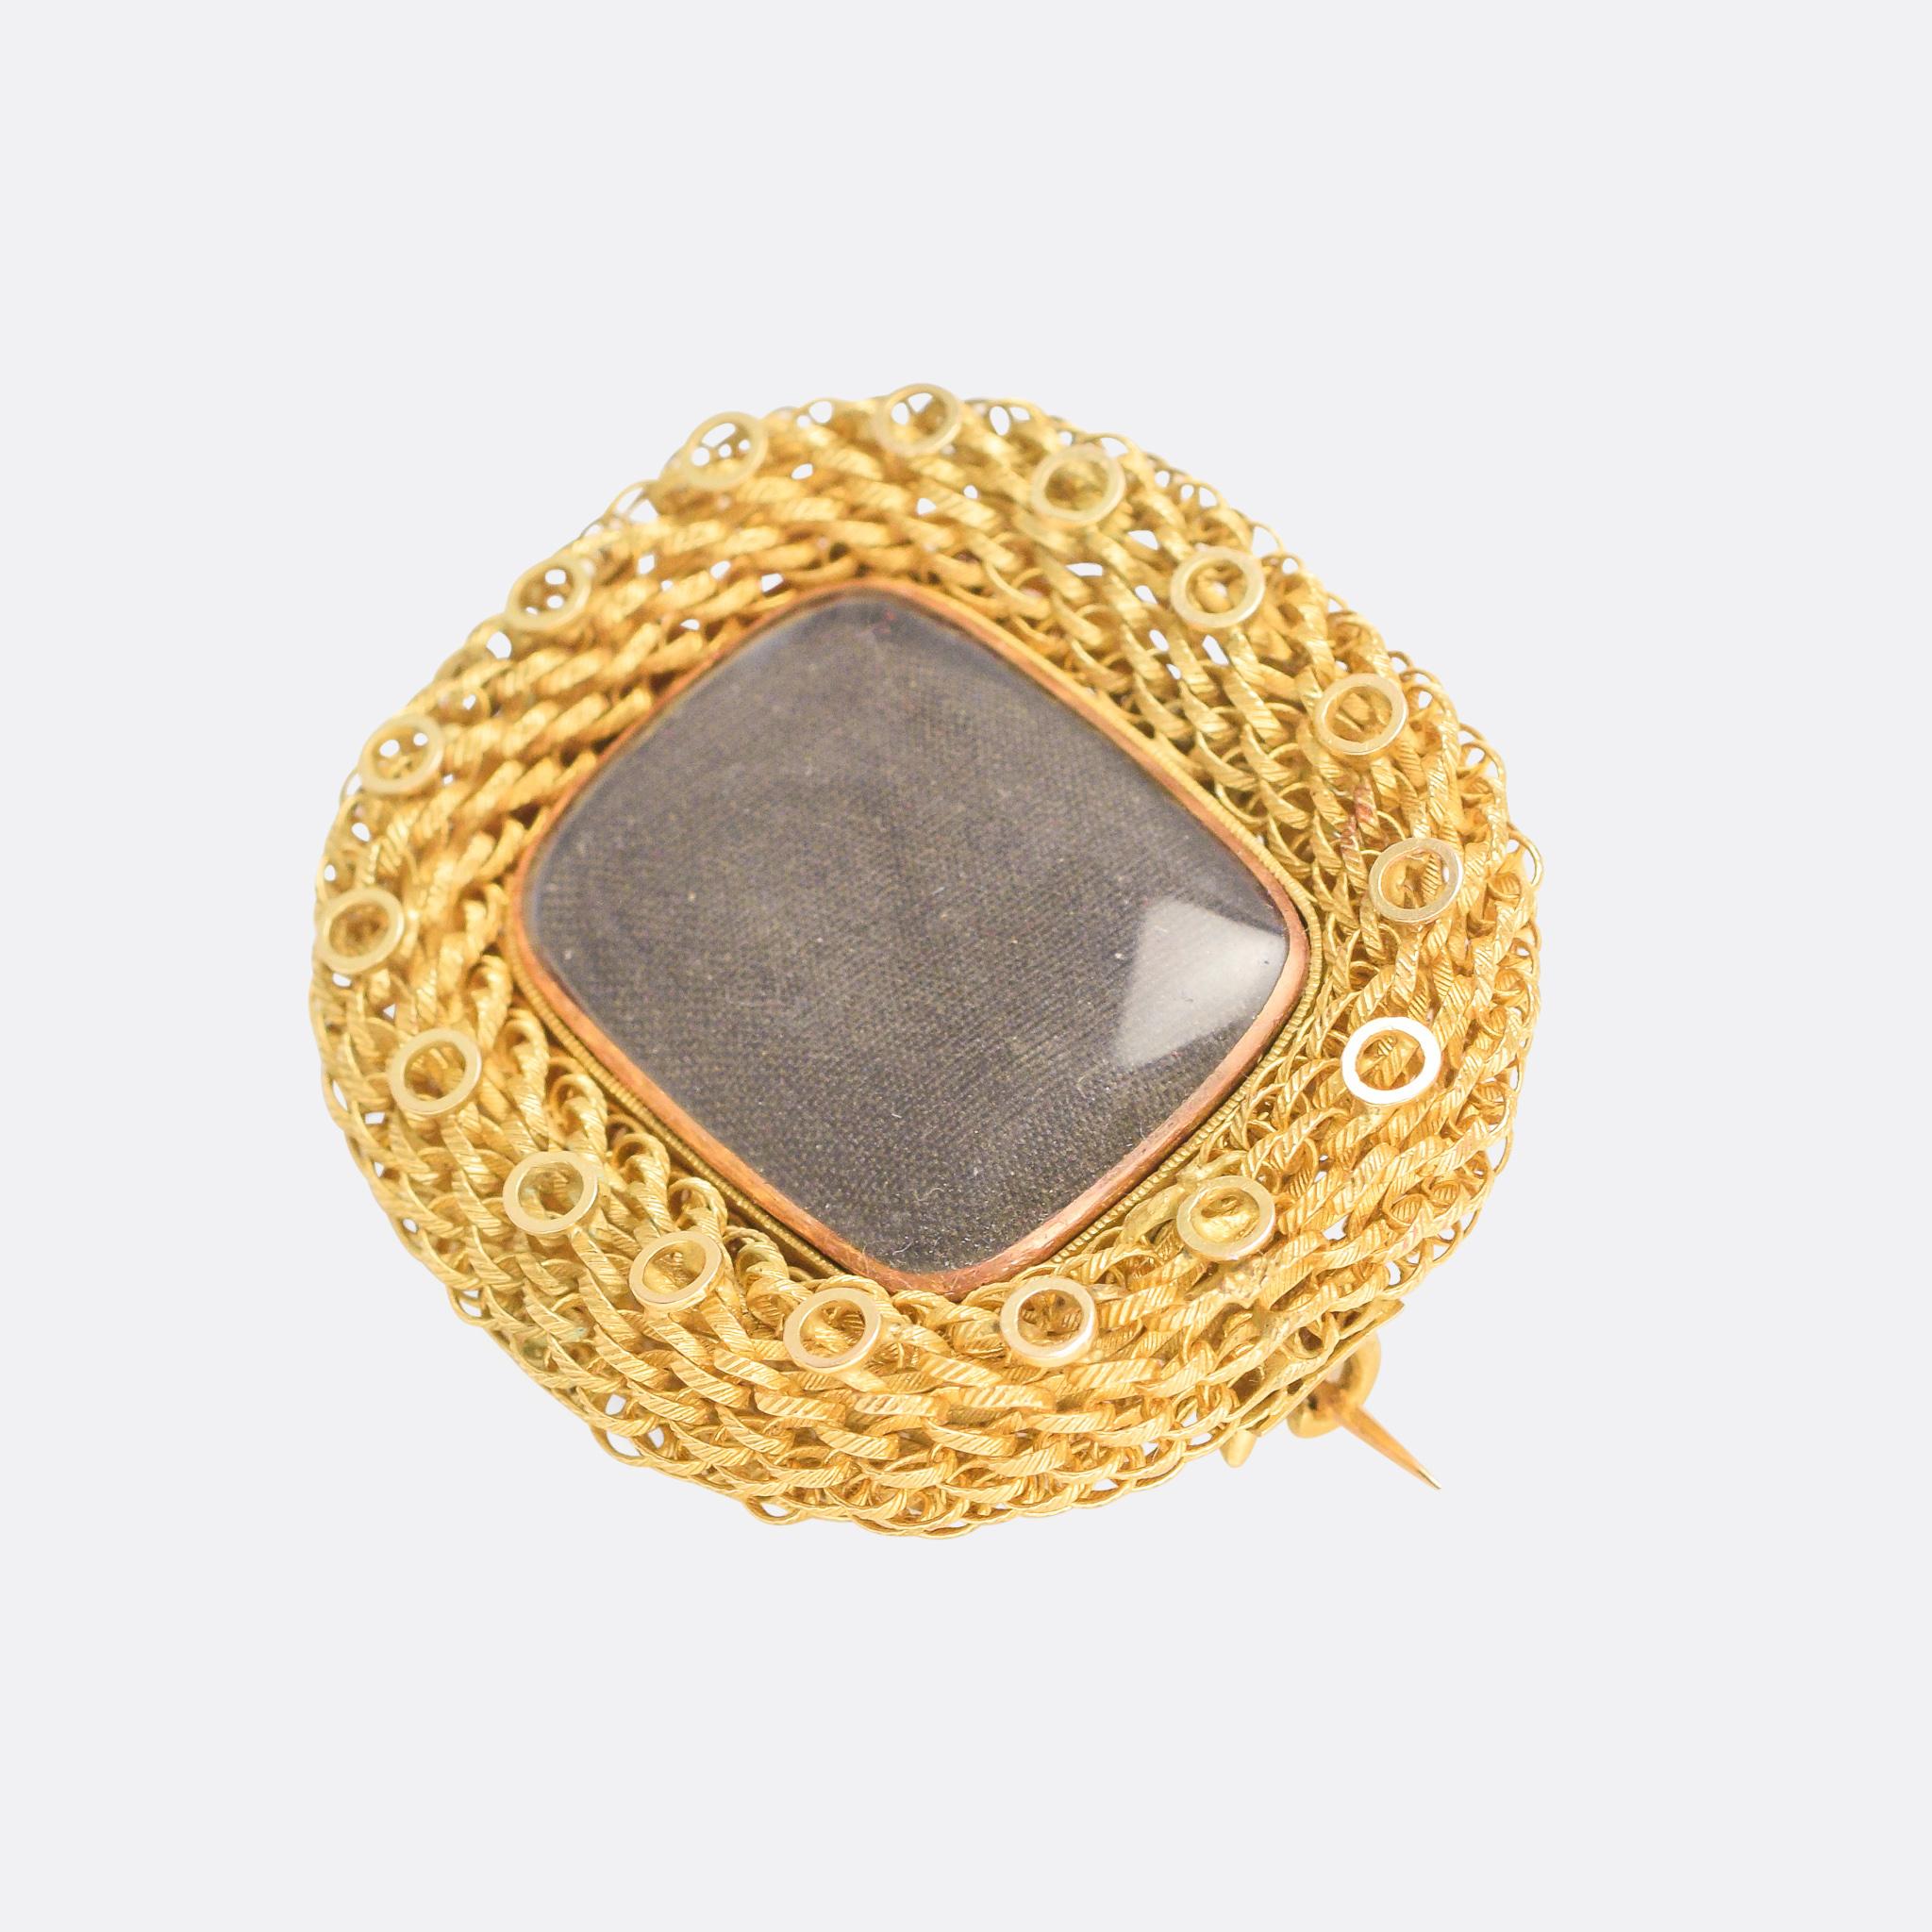 An absolutely stunning Georgian gold wire mesh suite comprising a bracelet and a brooch, the latter with central locket compartment and bail for wear as a pendant. The 15 karat gold has been expertly crafted into textured wire, and then intricately